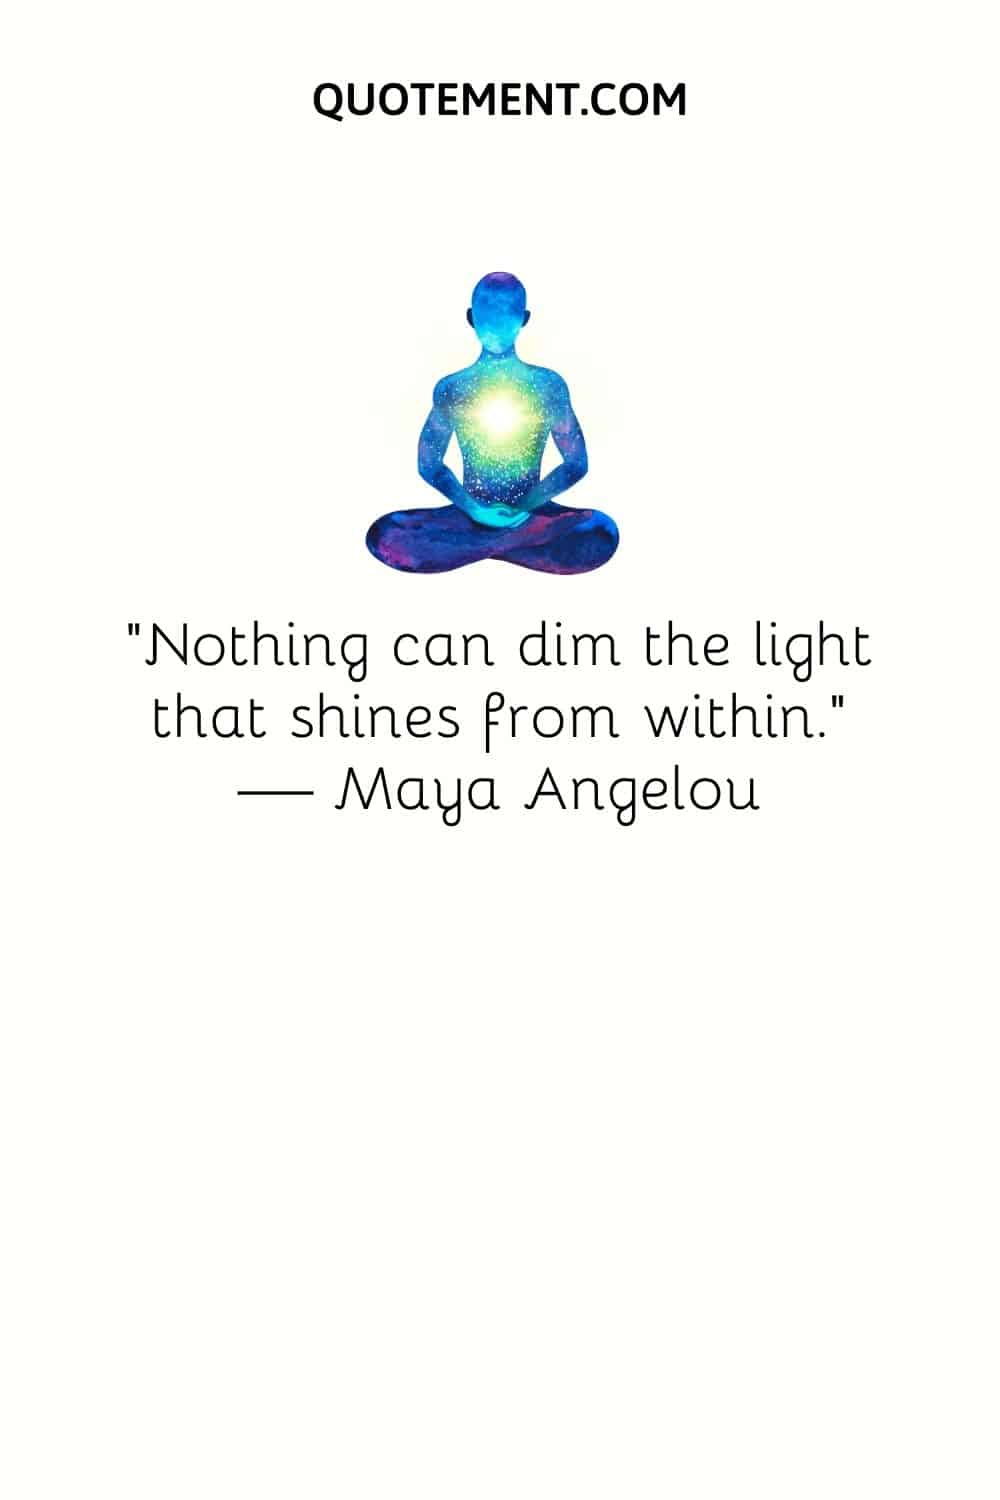 “Nothing can dim the light that shines from within.” — Maya Angelou